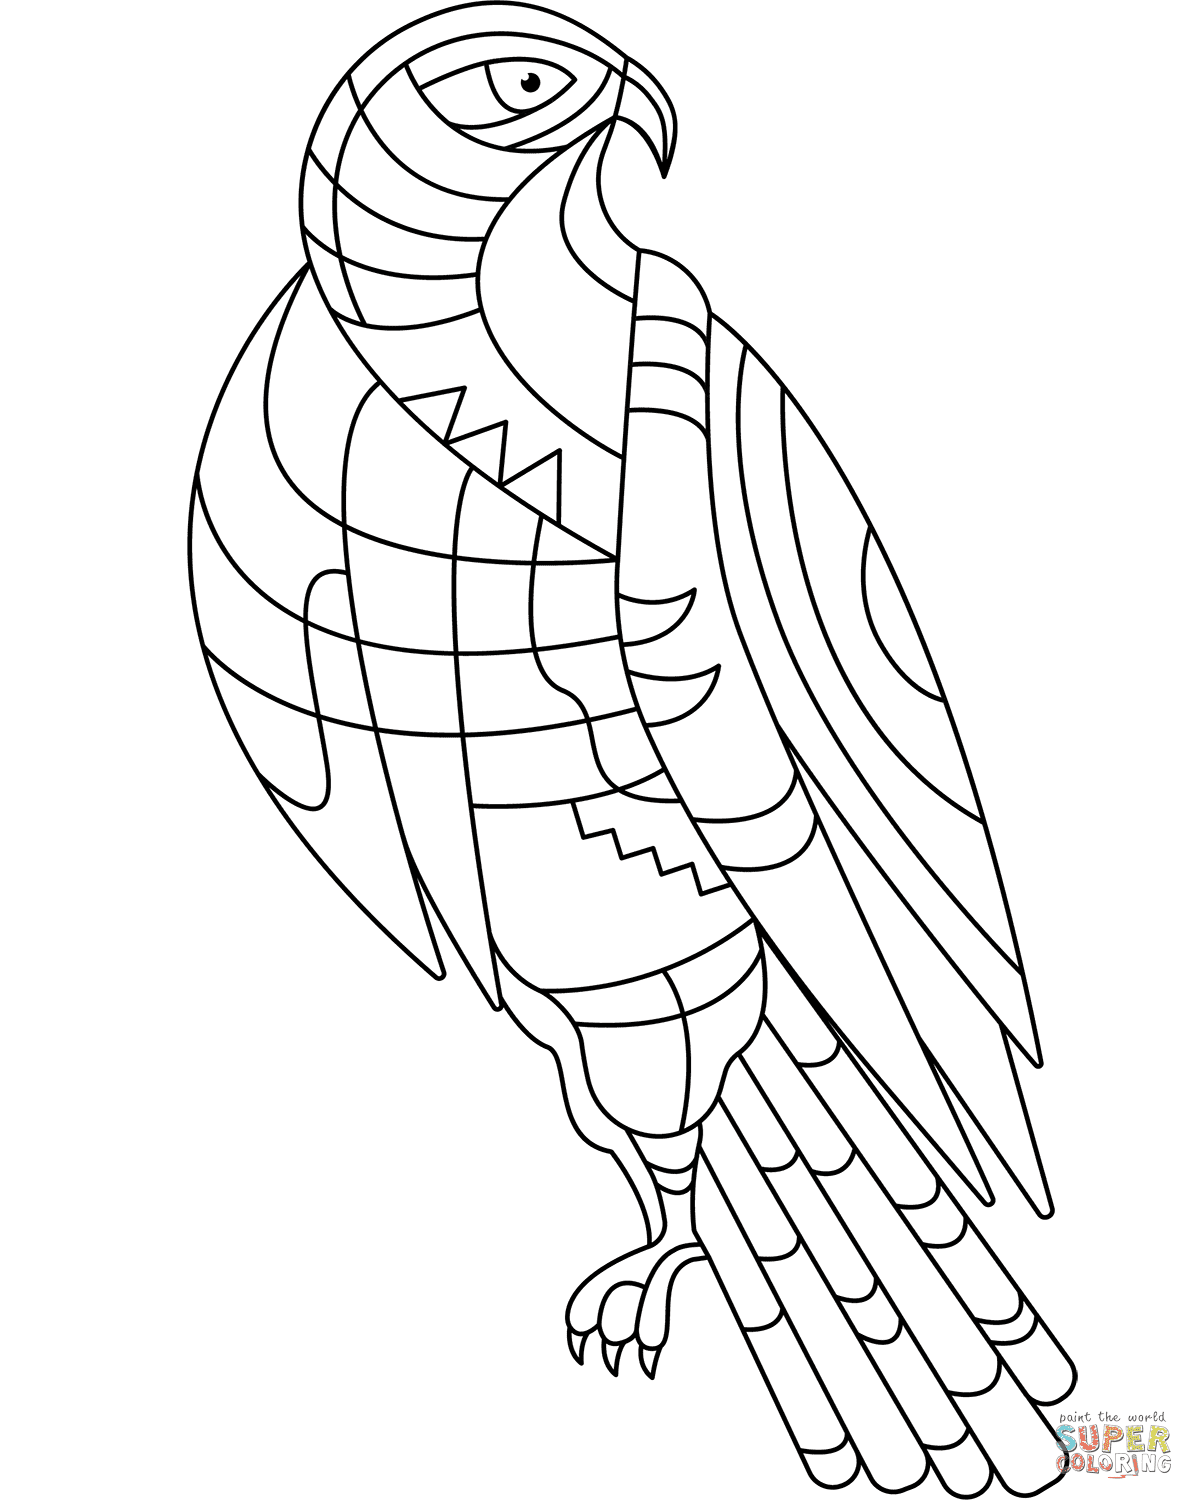 Abstract Eagle Coloring Page